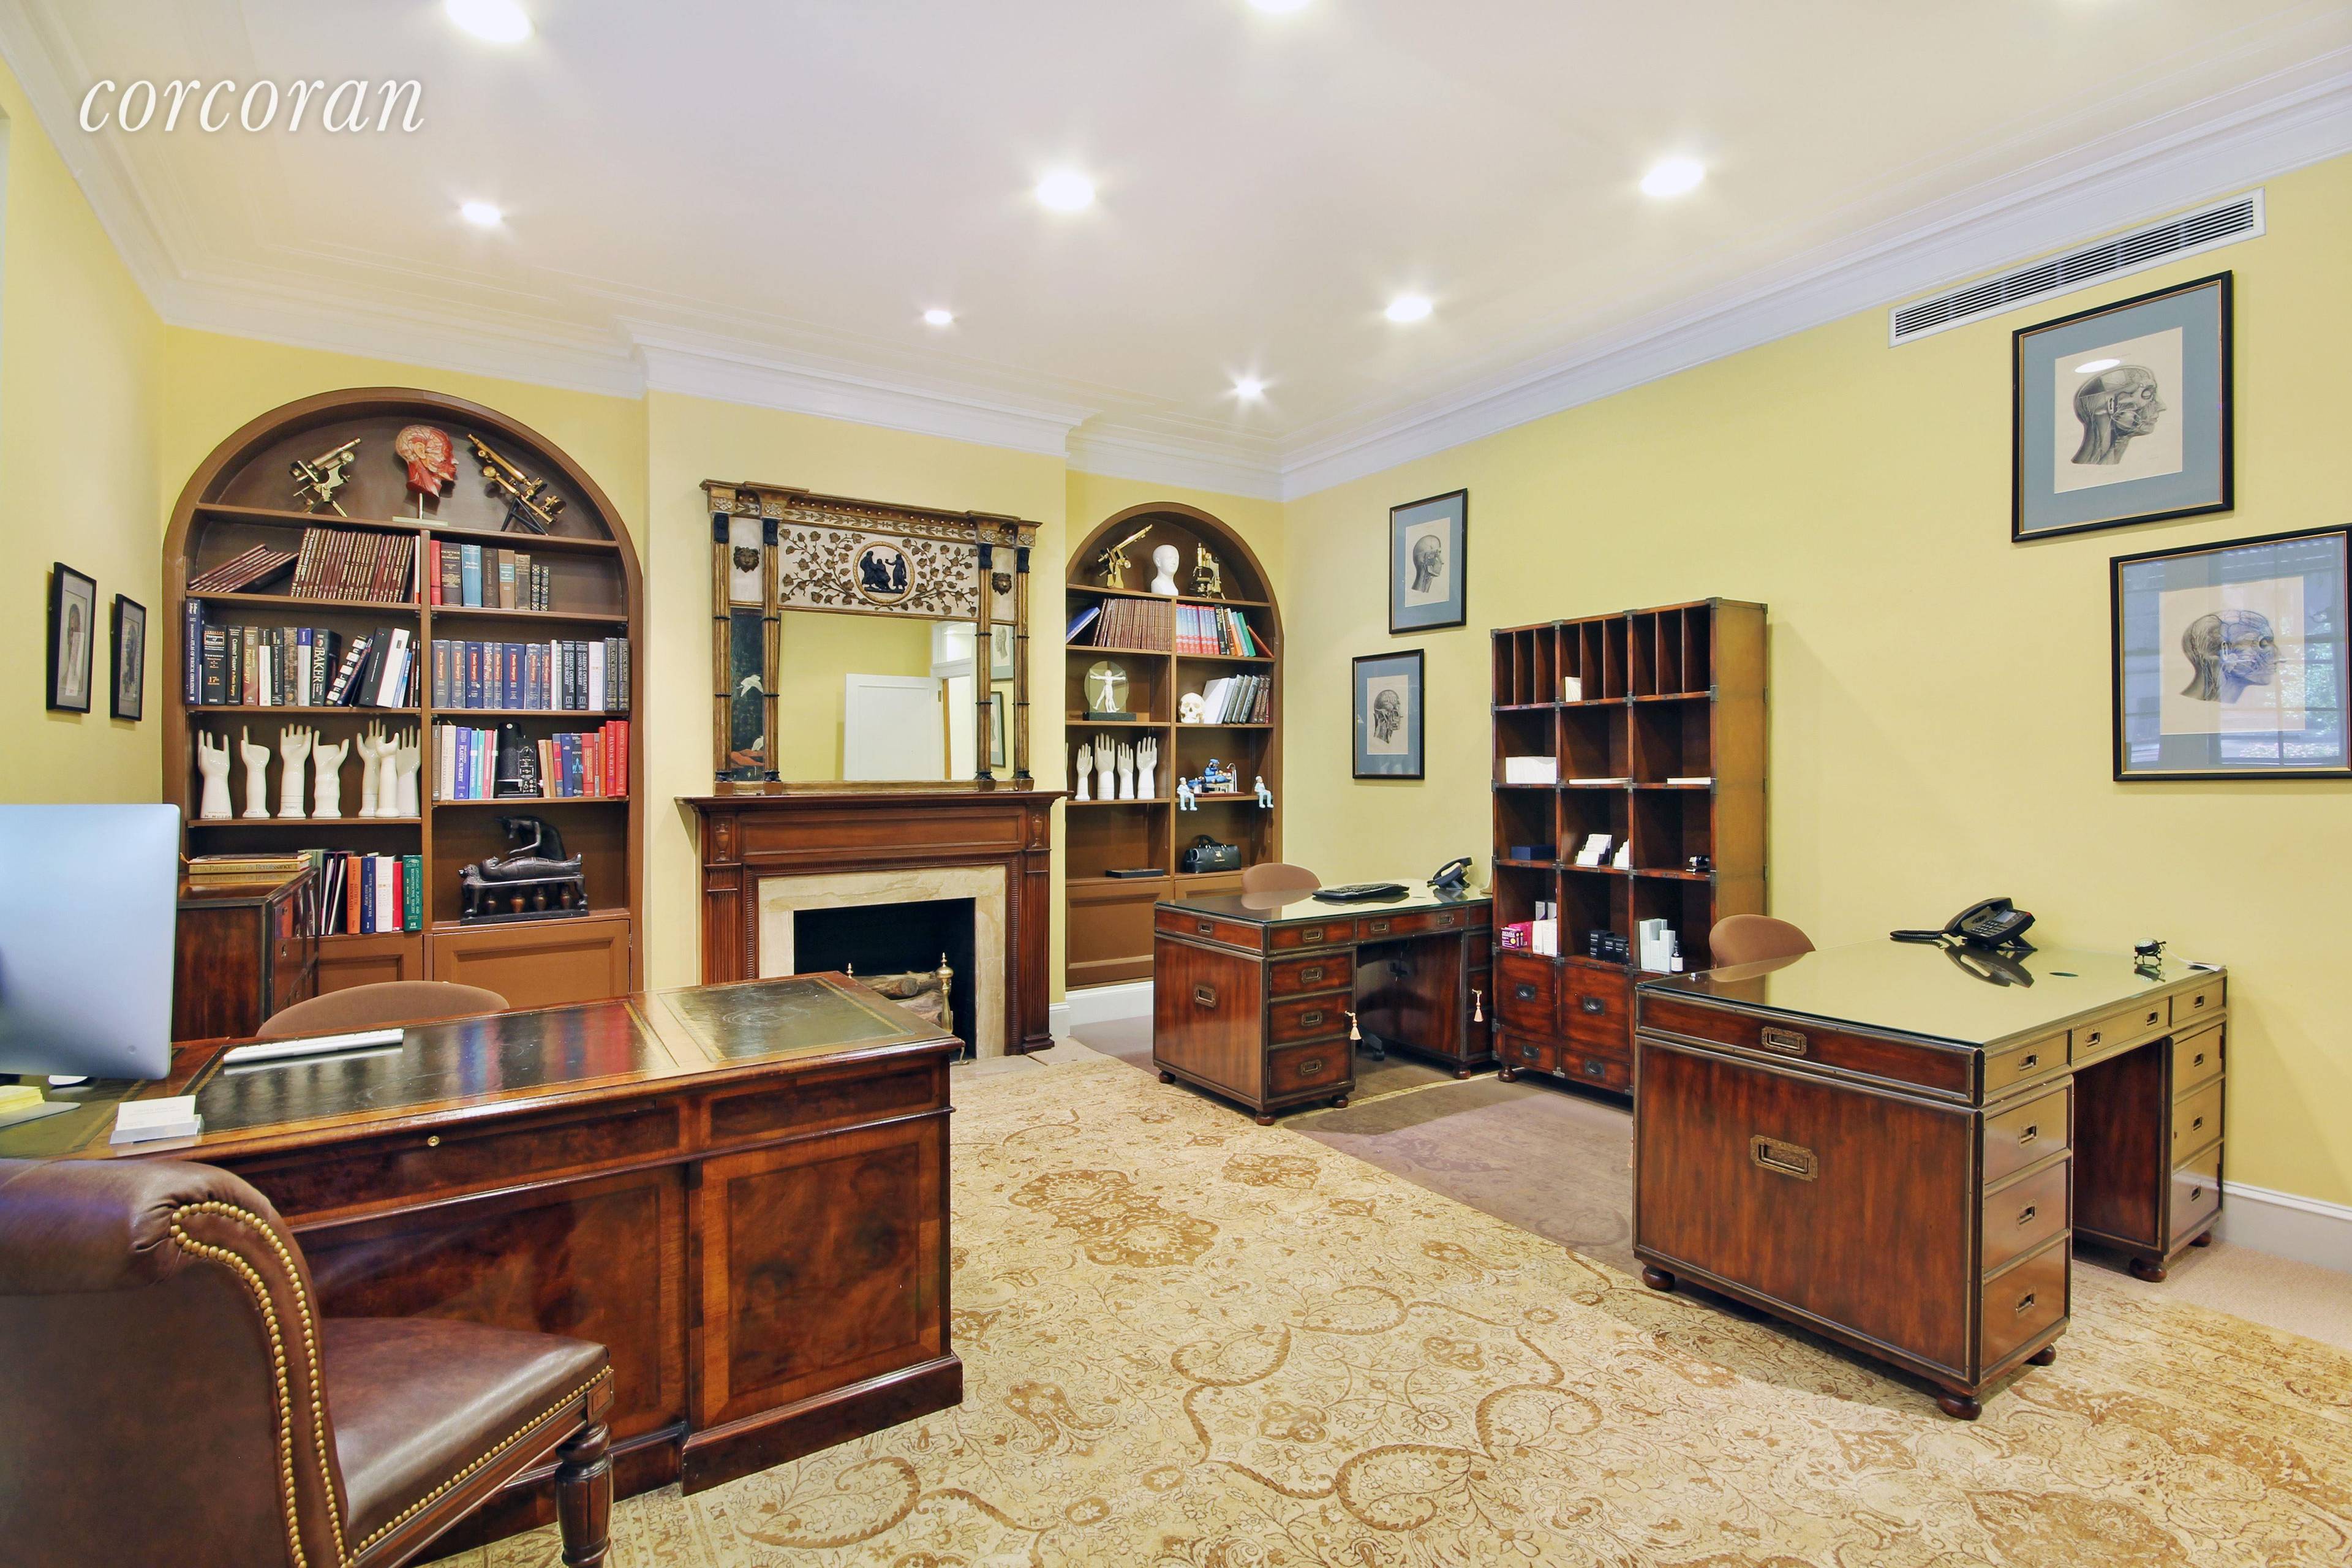 Presenting a Park Avenue turn key plastic surgeon's office for sale.